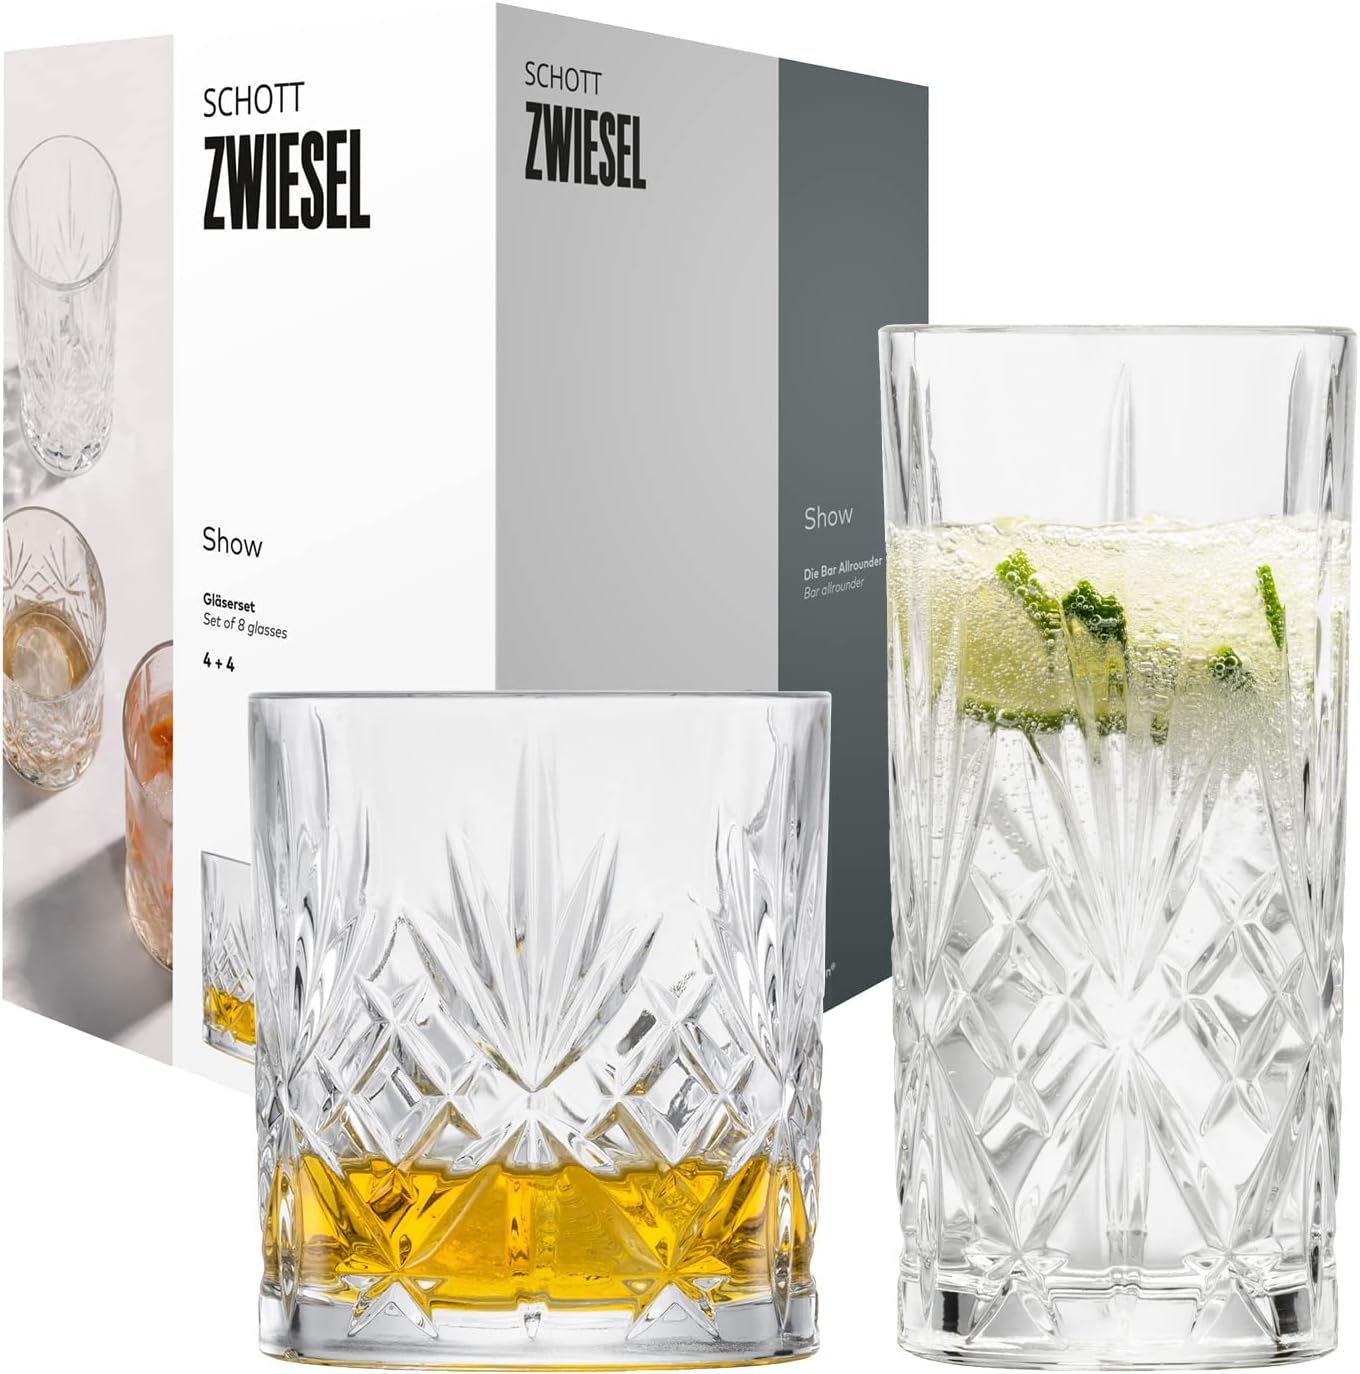 Schott Zwiesel Show Glasses Set of 8, 4 Graceful Long Drink Glasses and Whiskey Glasses With Relief Dishwasher Safe Crystal Glasses (Item No. 121881)